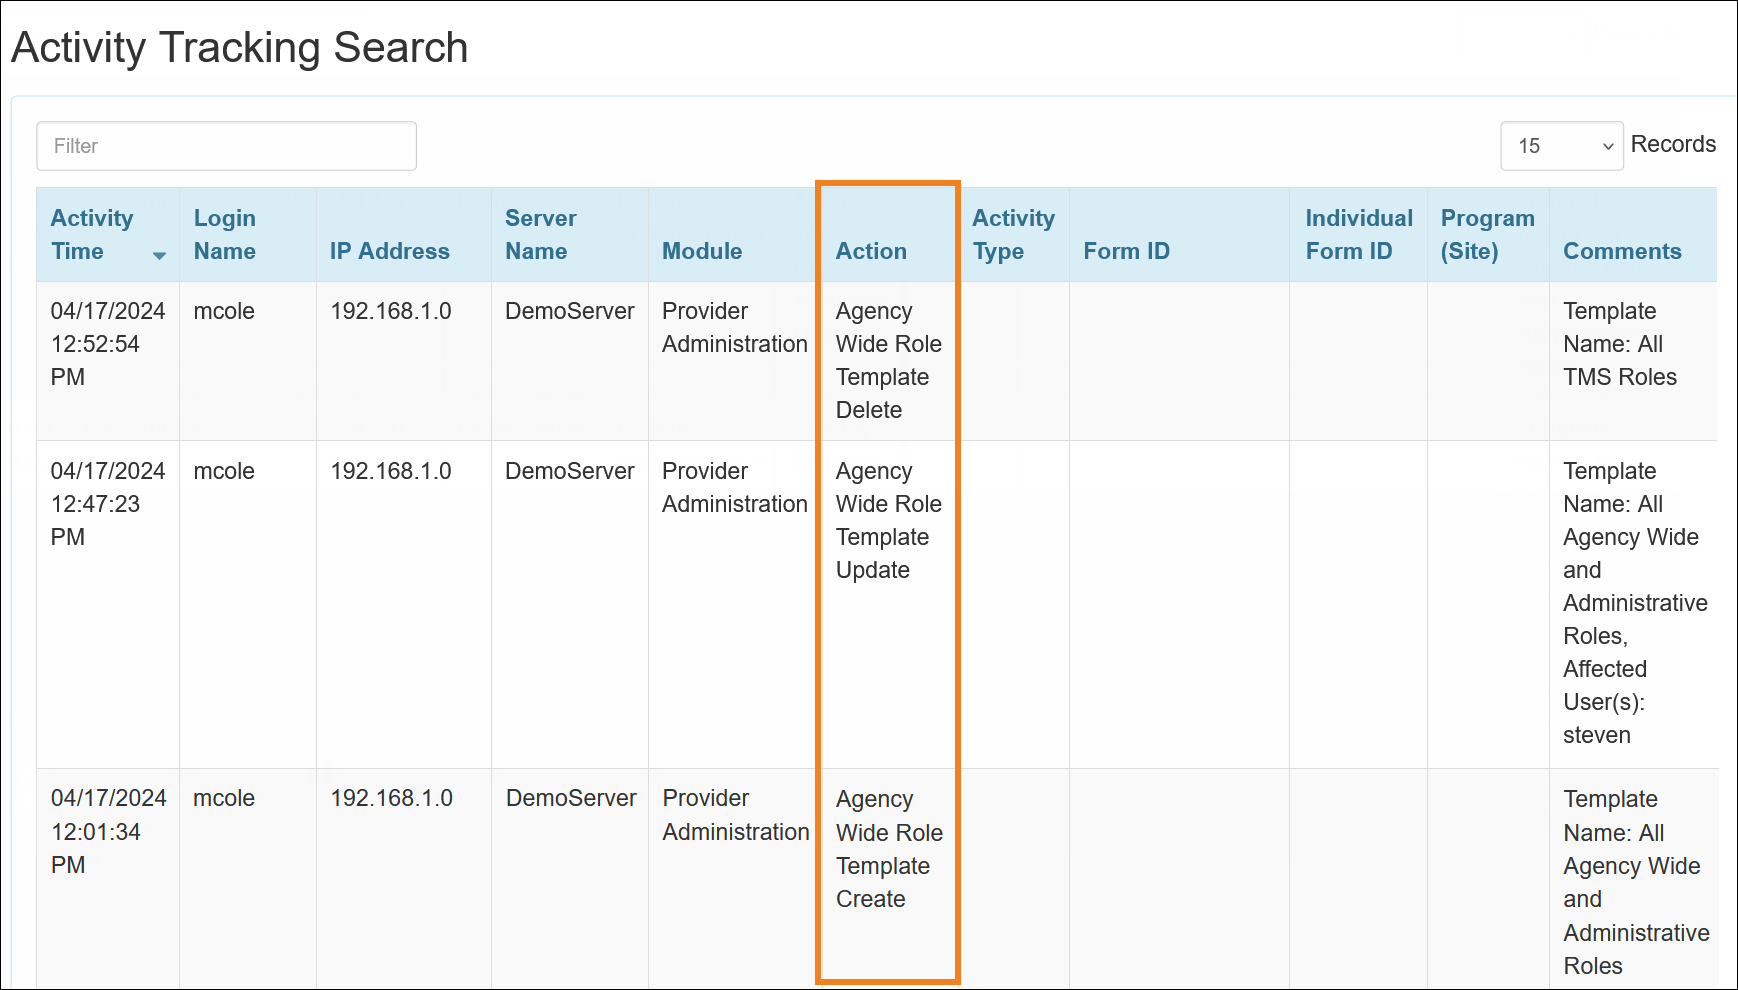 Screenshot showing the Activity Tracking Search result page